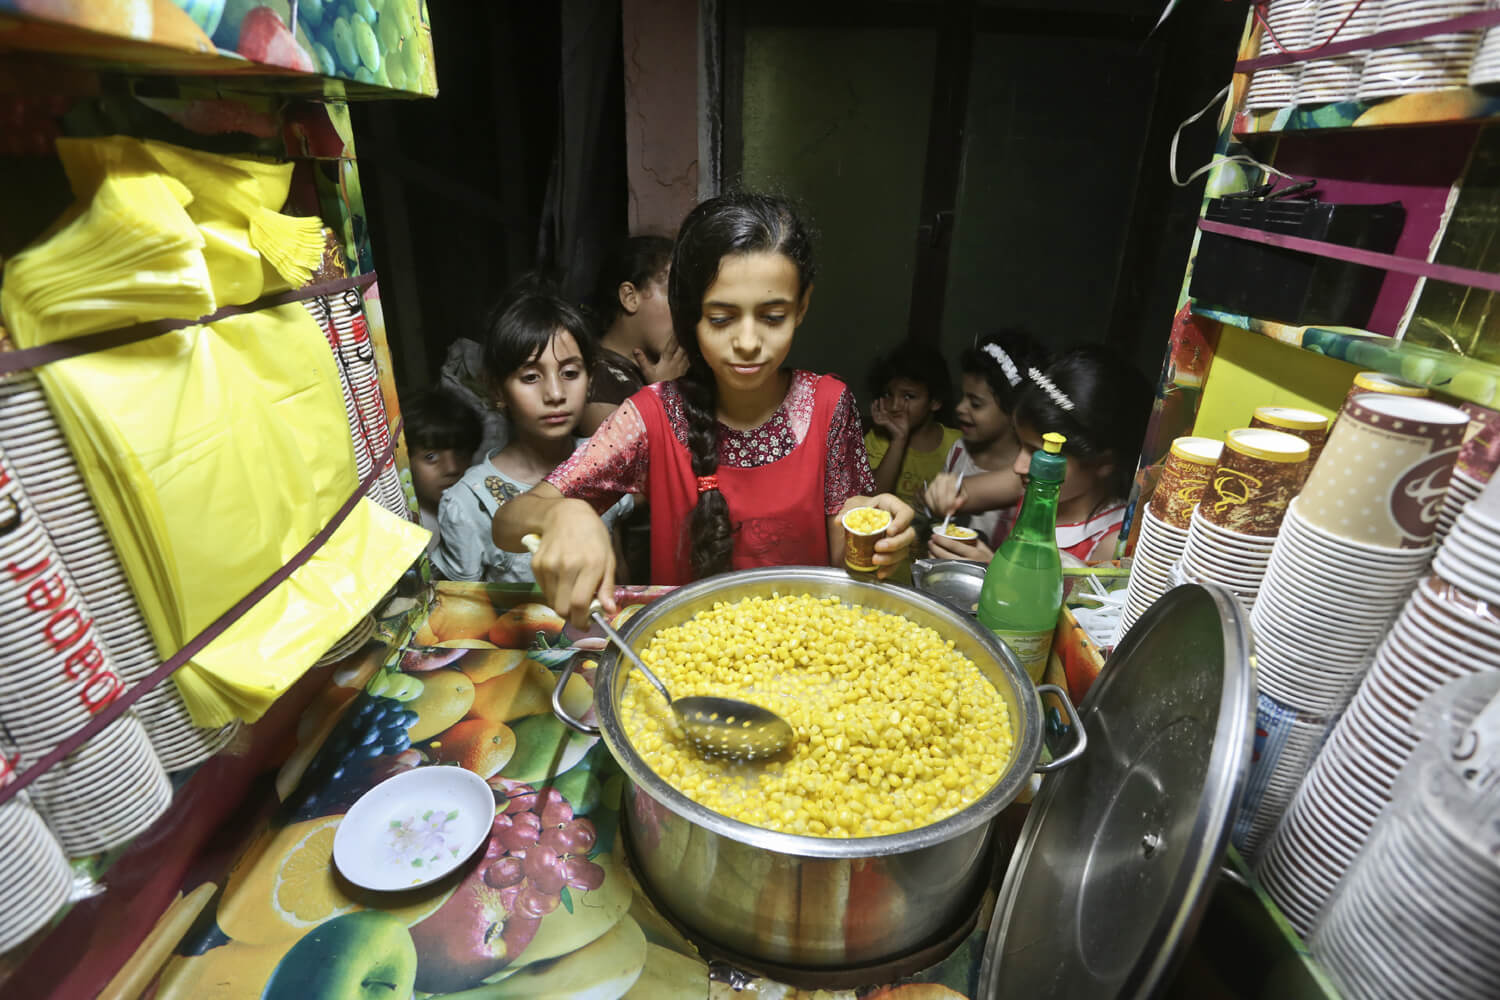 Mervit Baker, 12, sells cups of buttered corn in front of her house in the Al- Zaytoon area, Gaza, June 27, 2016. (Photo: Mohammed Asad) 